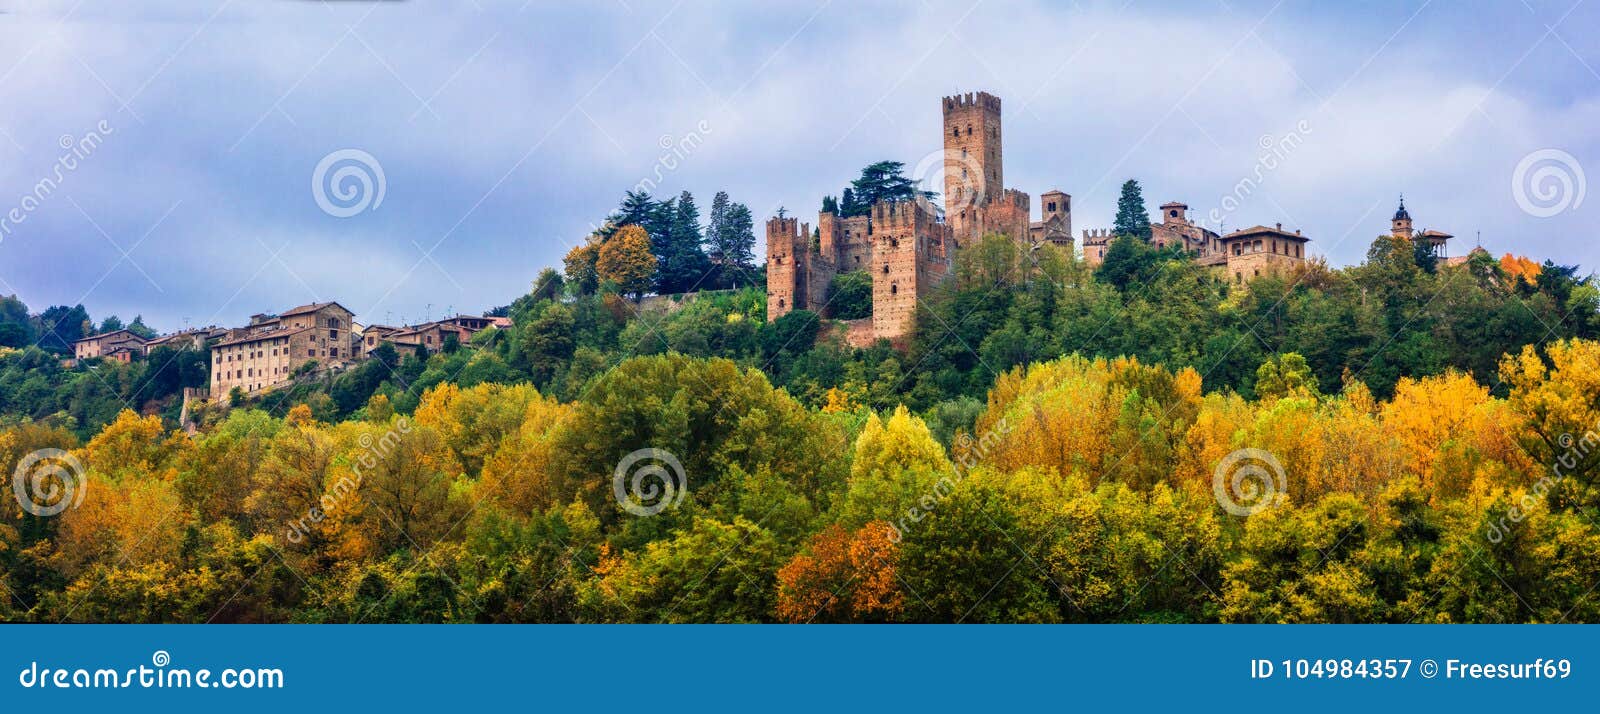 medieval towns and castles of italy - castell` arquato in emilia-